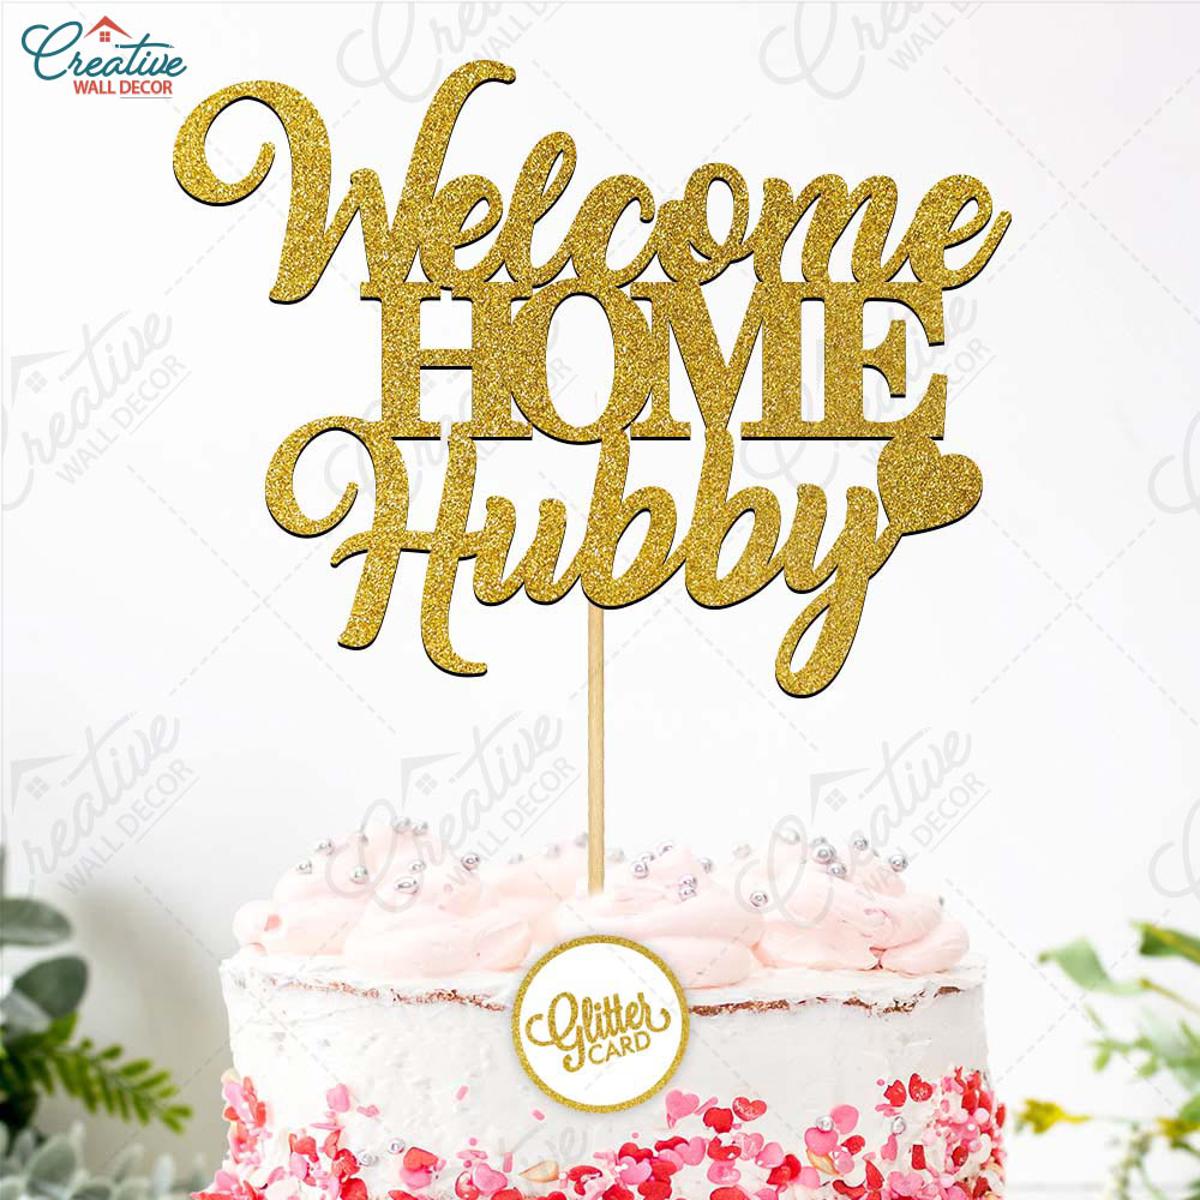 welcome home cake for him｜TikTok Search